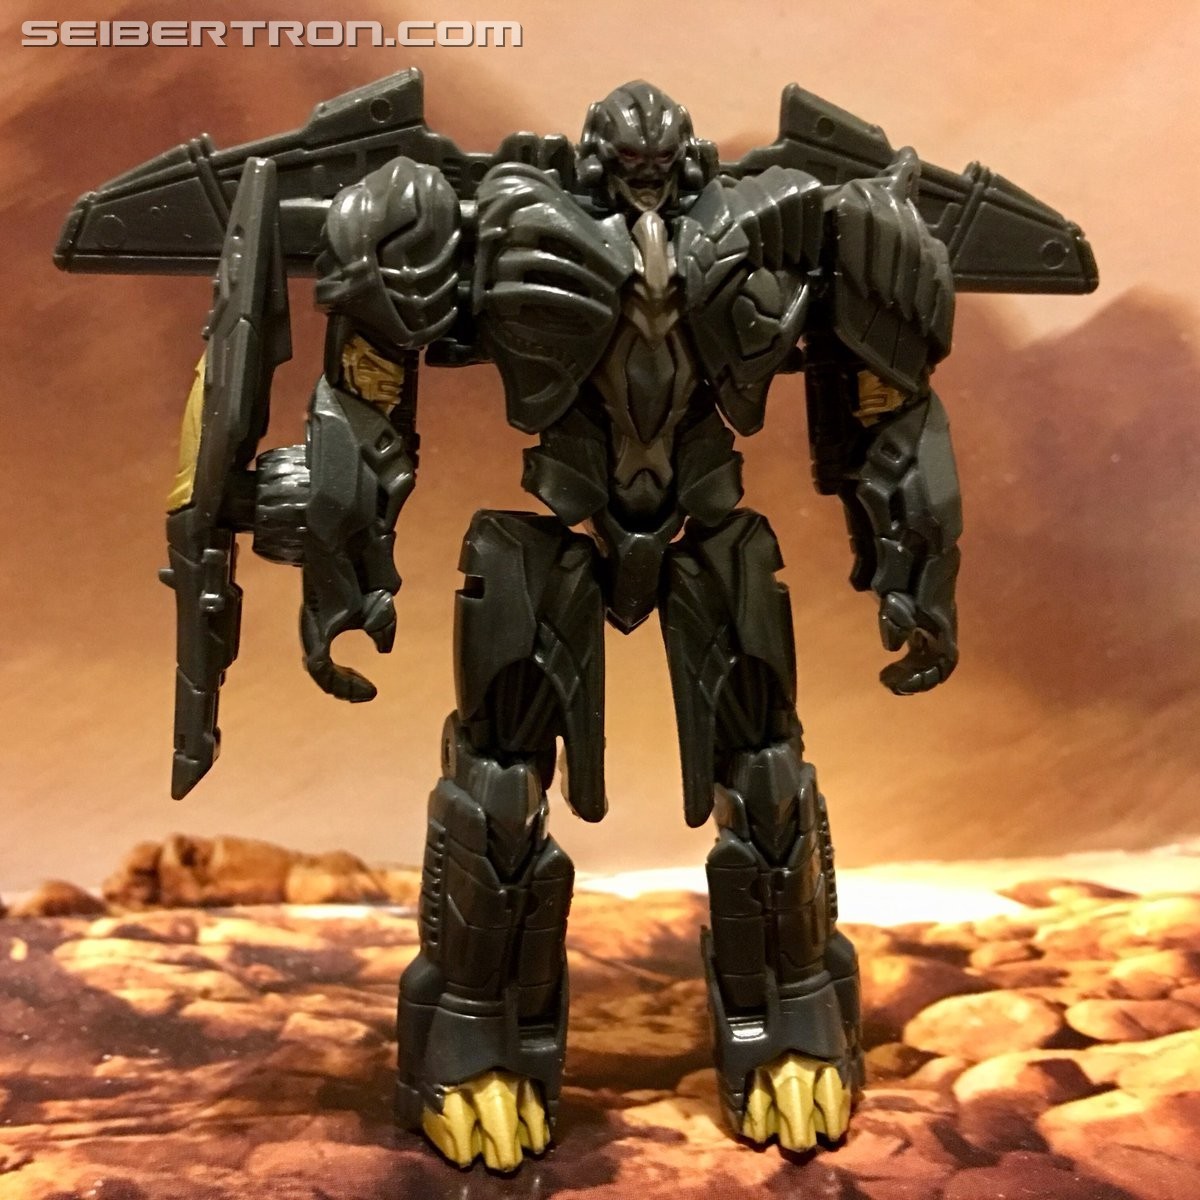 Transformers News: Re: Transformers: The Last Knight Toys Discussion Thread